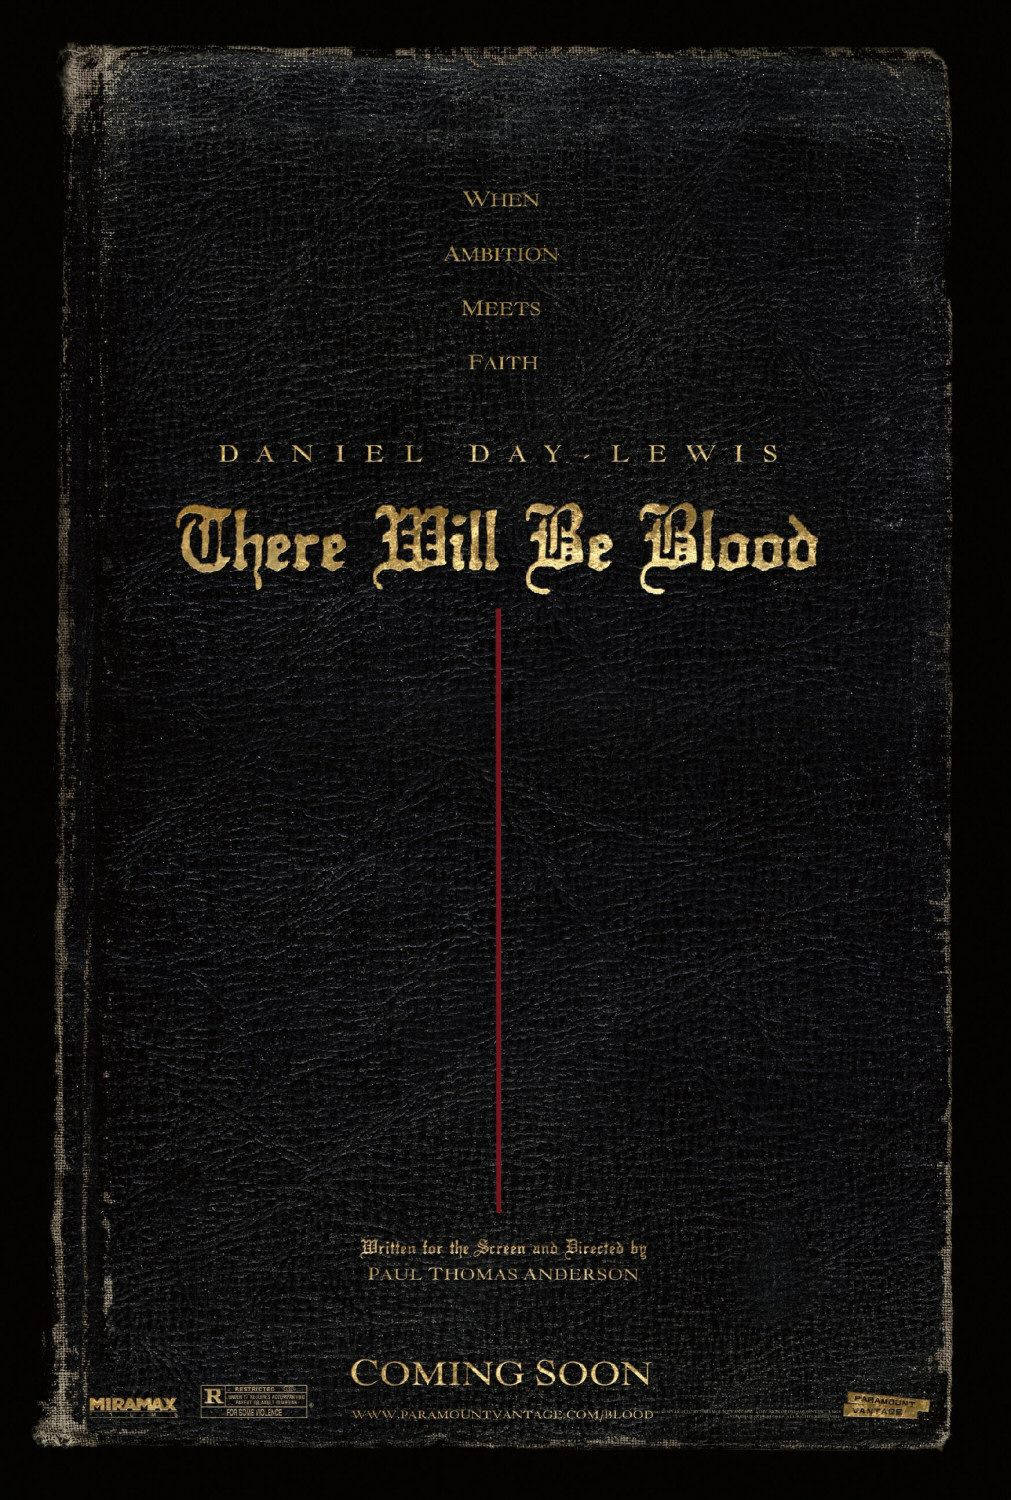 "cinematic Drama Unfolding In 'there Will Be Blood'" Wallpaper